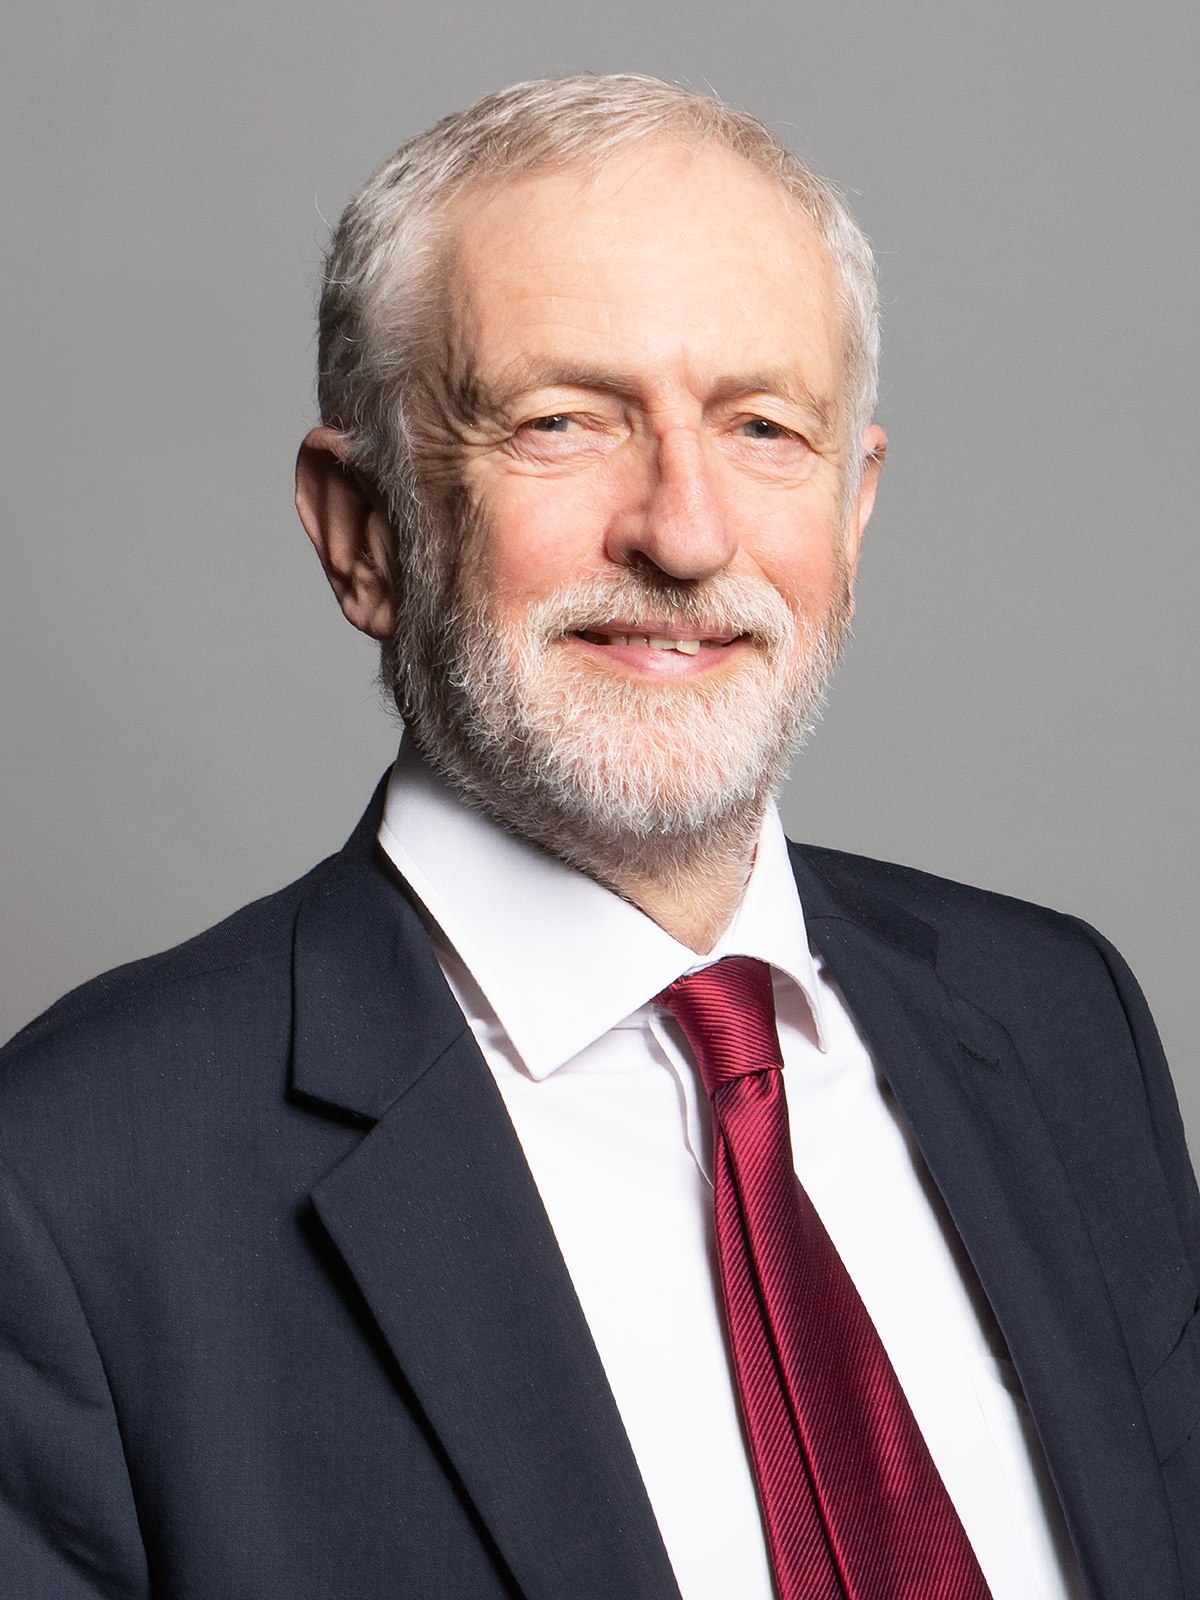 Jeremy Corbyn leads call to rename profession to physician ‘assistant’